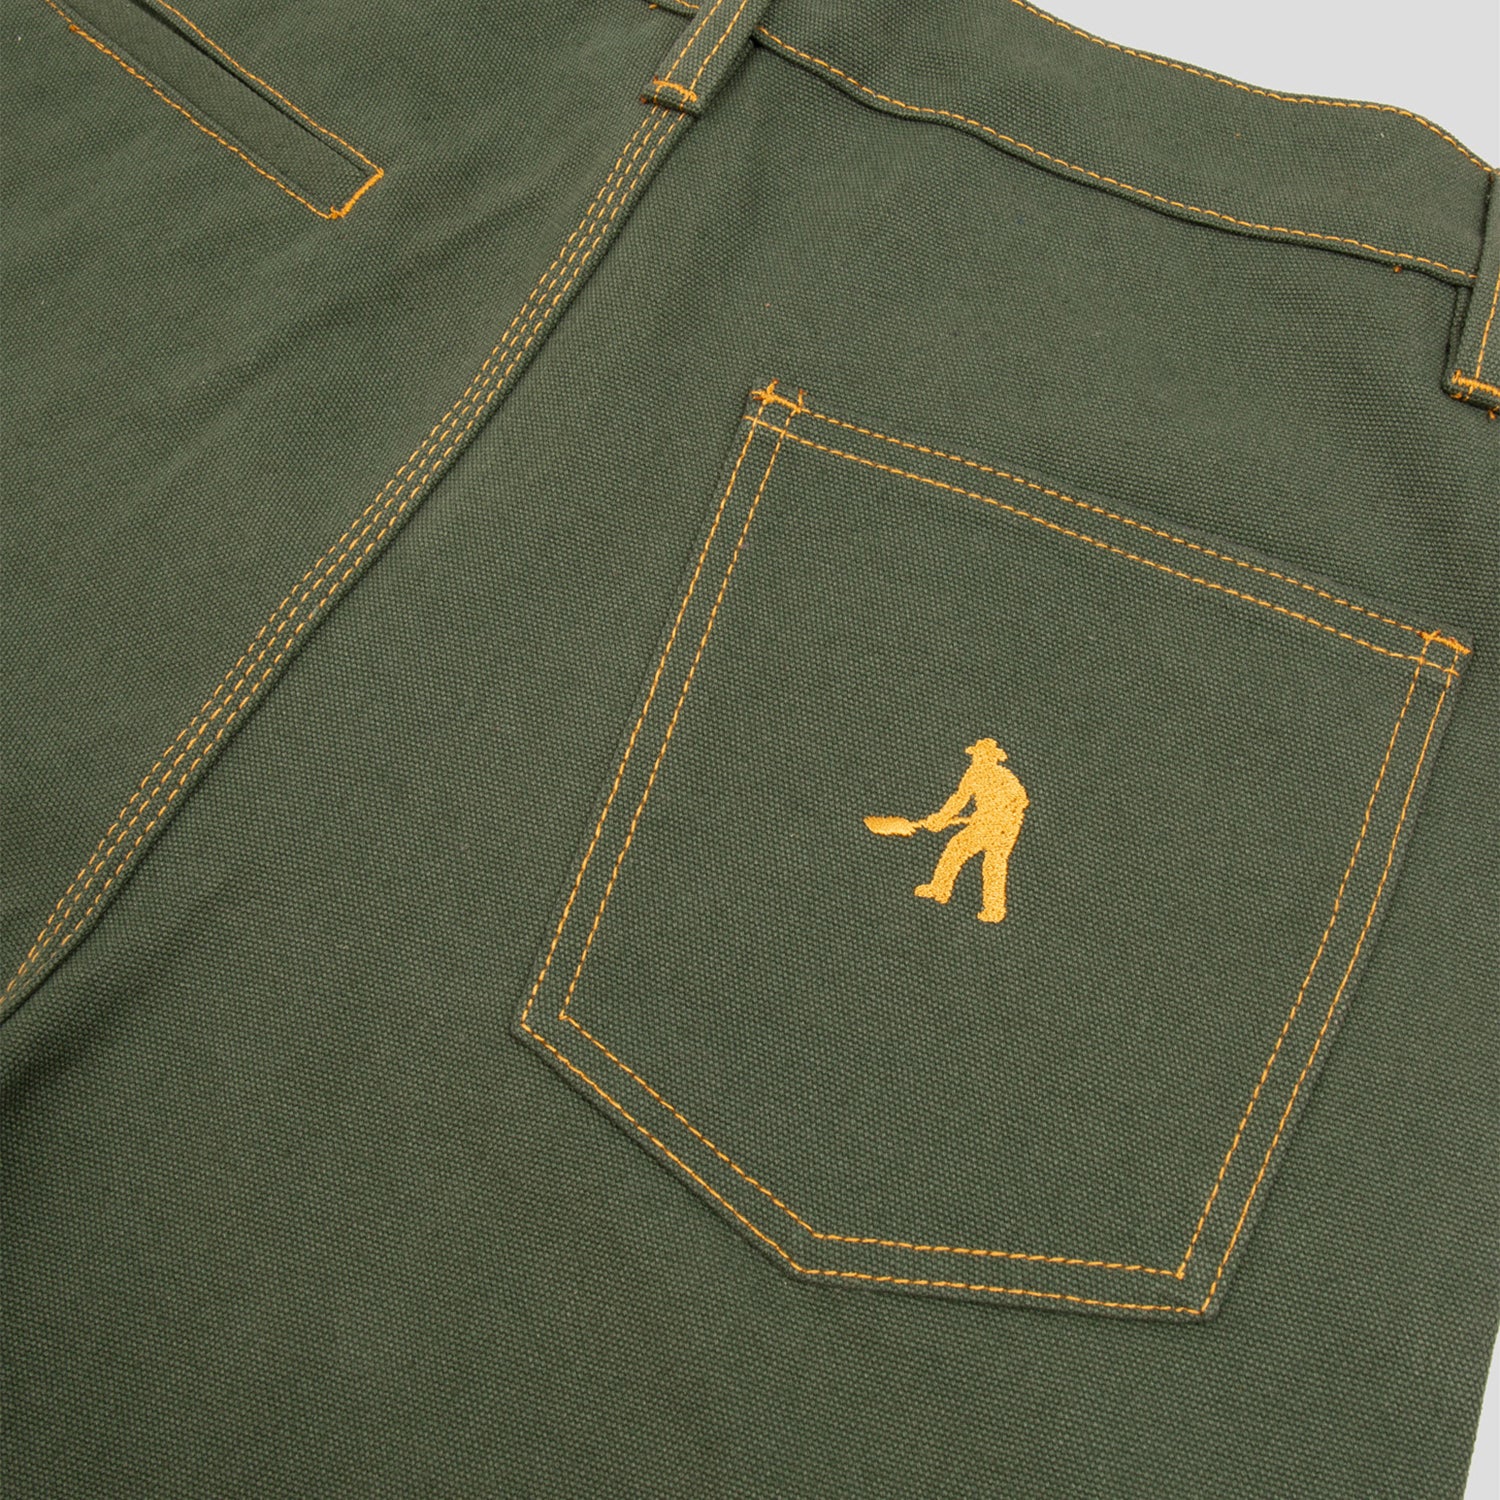 PASS~PORT "DIGGERS CLUB" PANT OLIVE